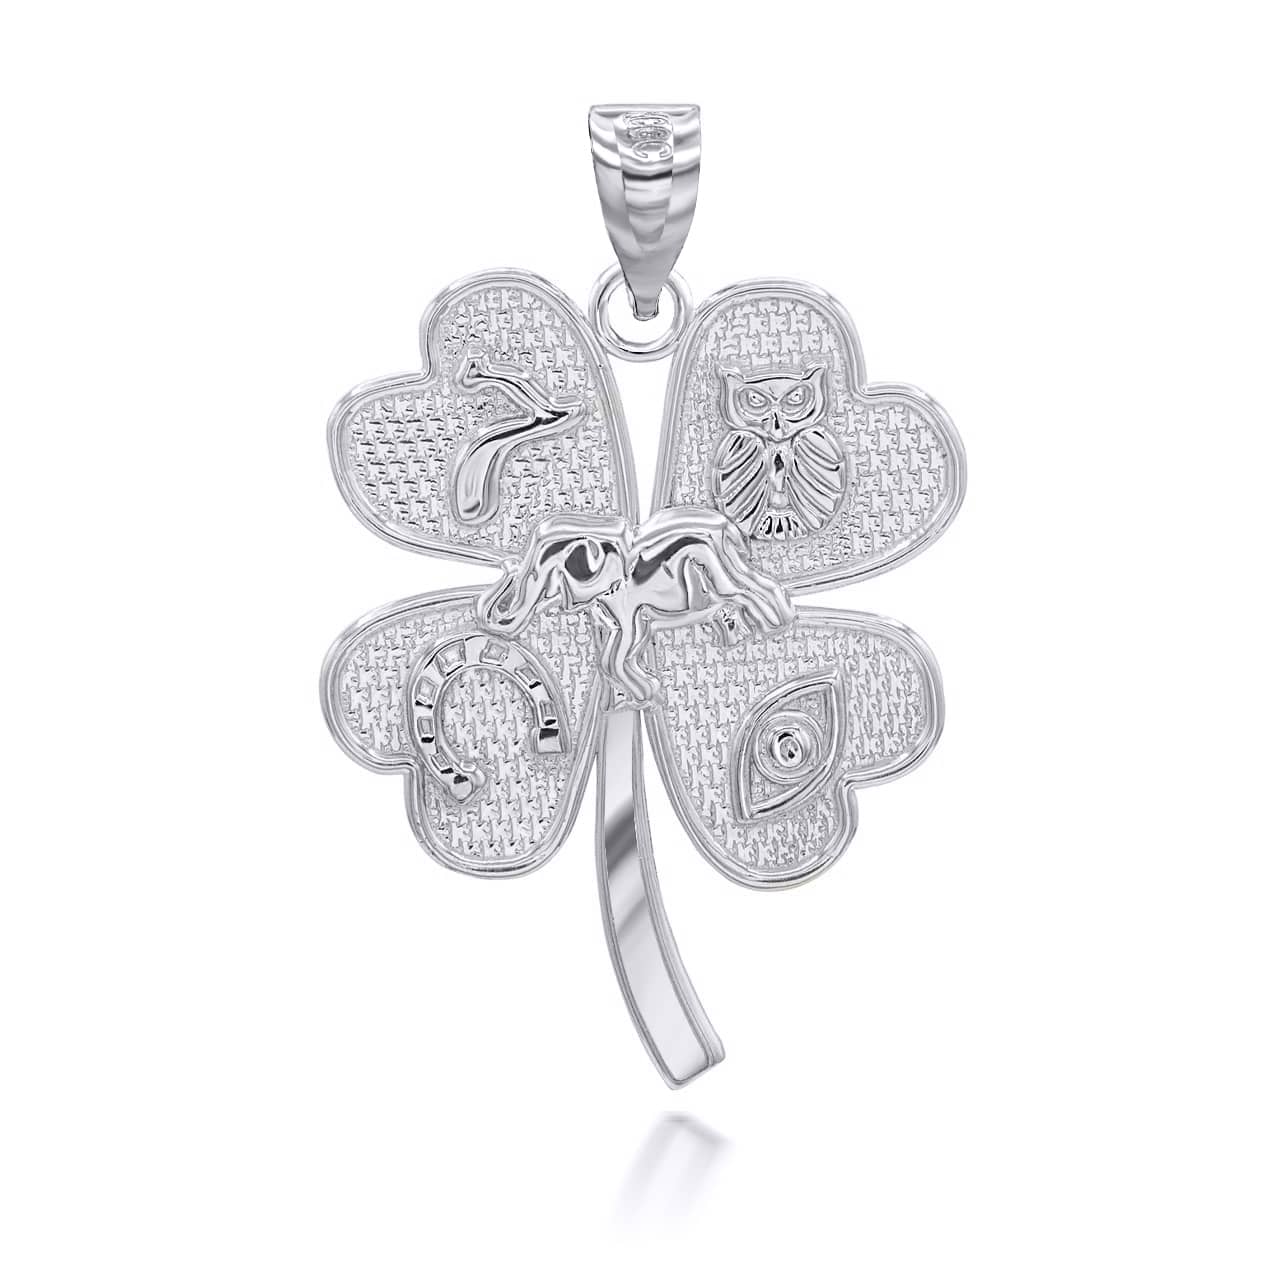 Women's Lucky Clover Floral Charms Necklace